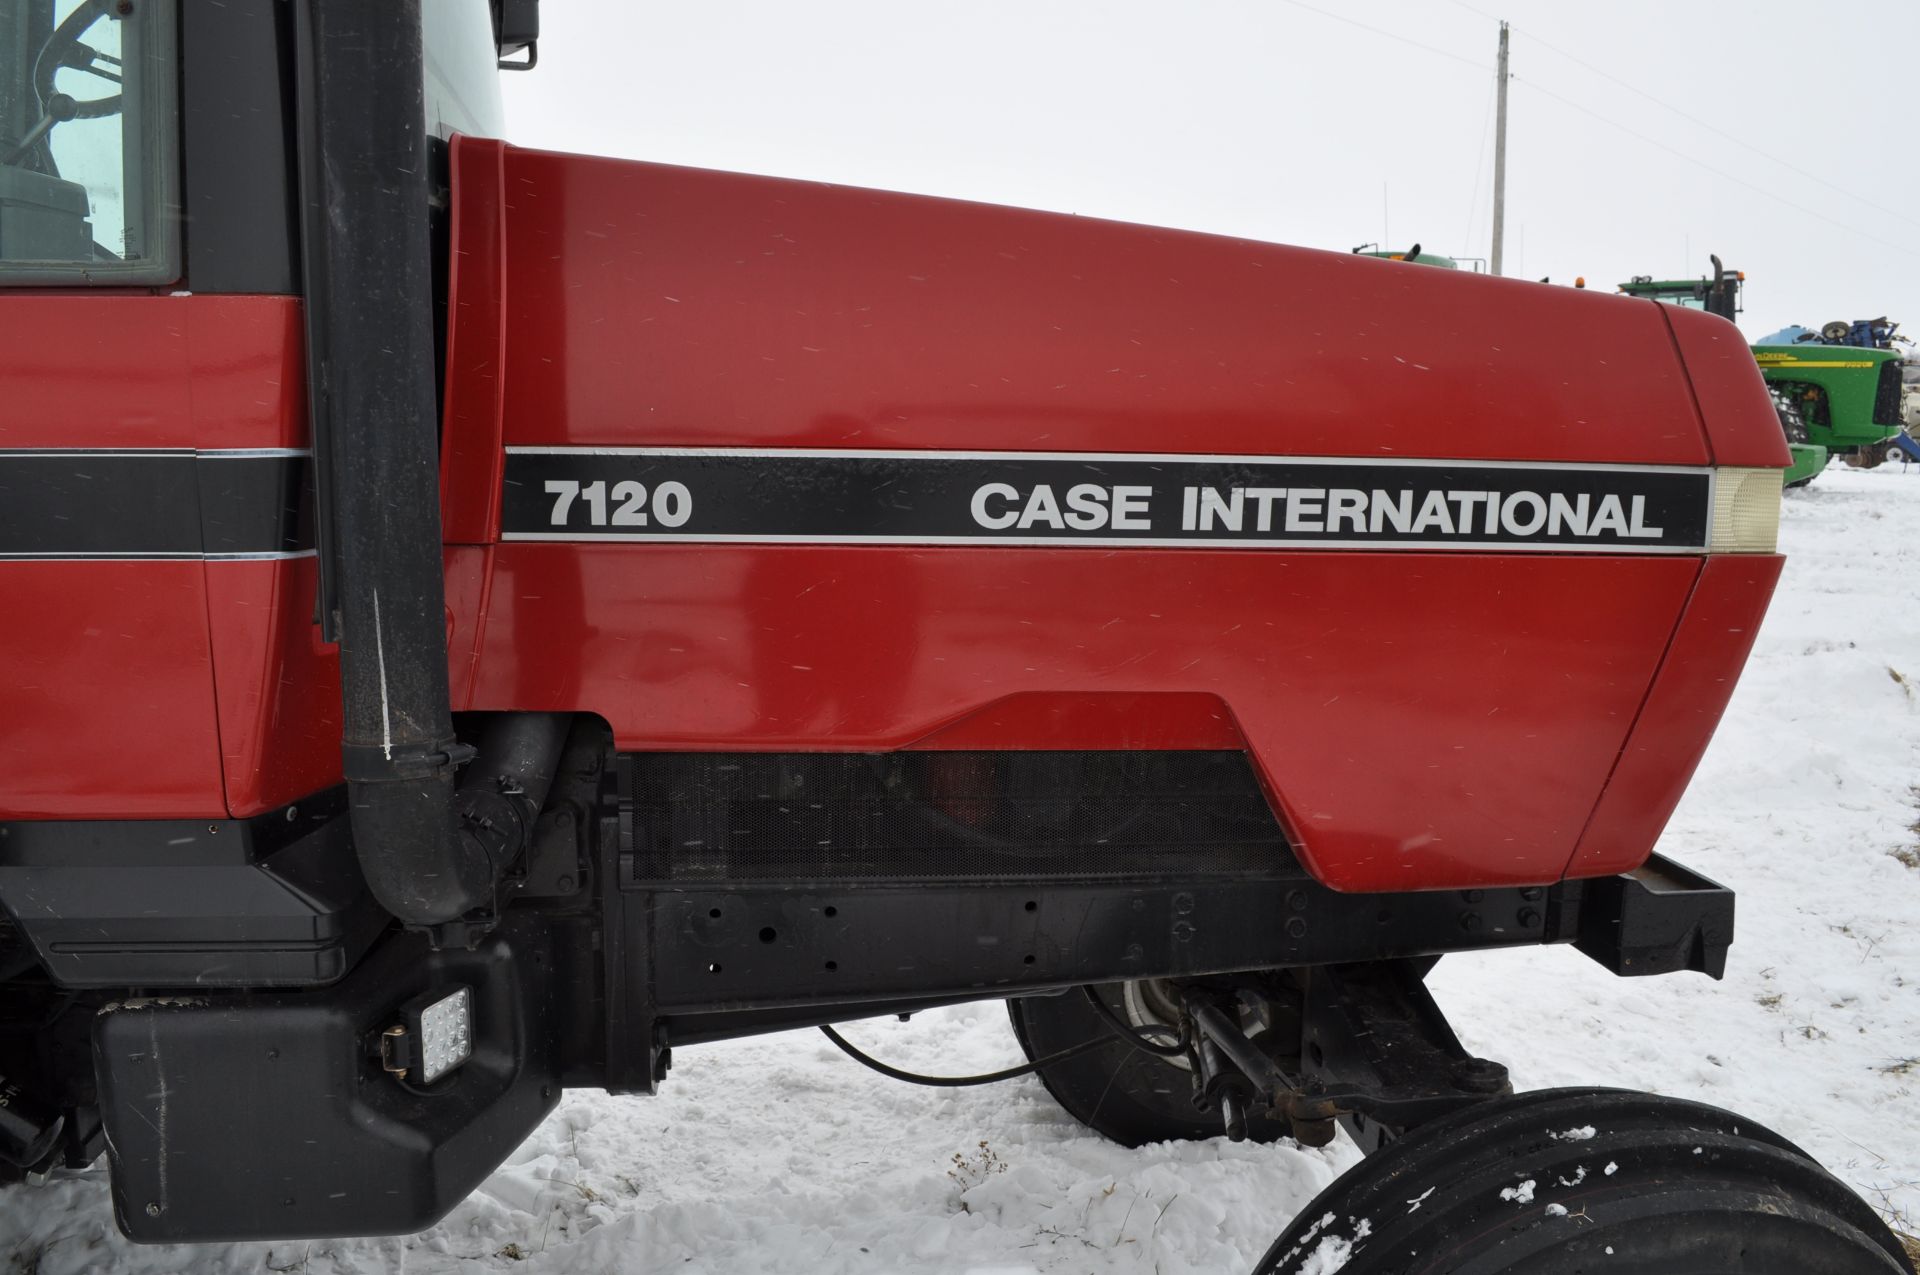 Case IH 7120 tractor, 2WD, power shift, 18.4 R 42 tires, 540/1000 PTO, 3 hyd remotes, 3 pt, shows - Image 12 of 37